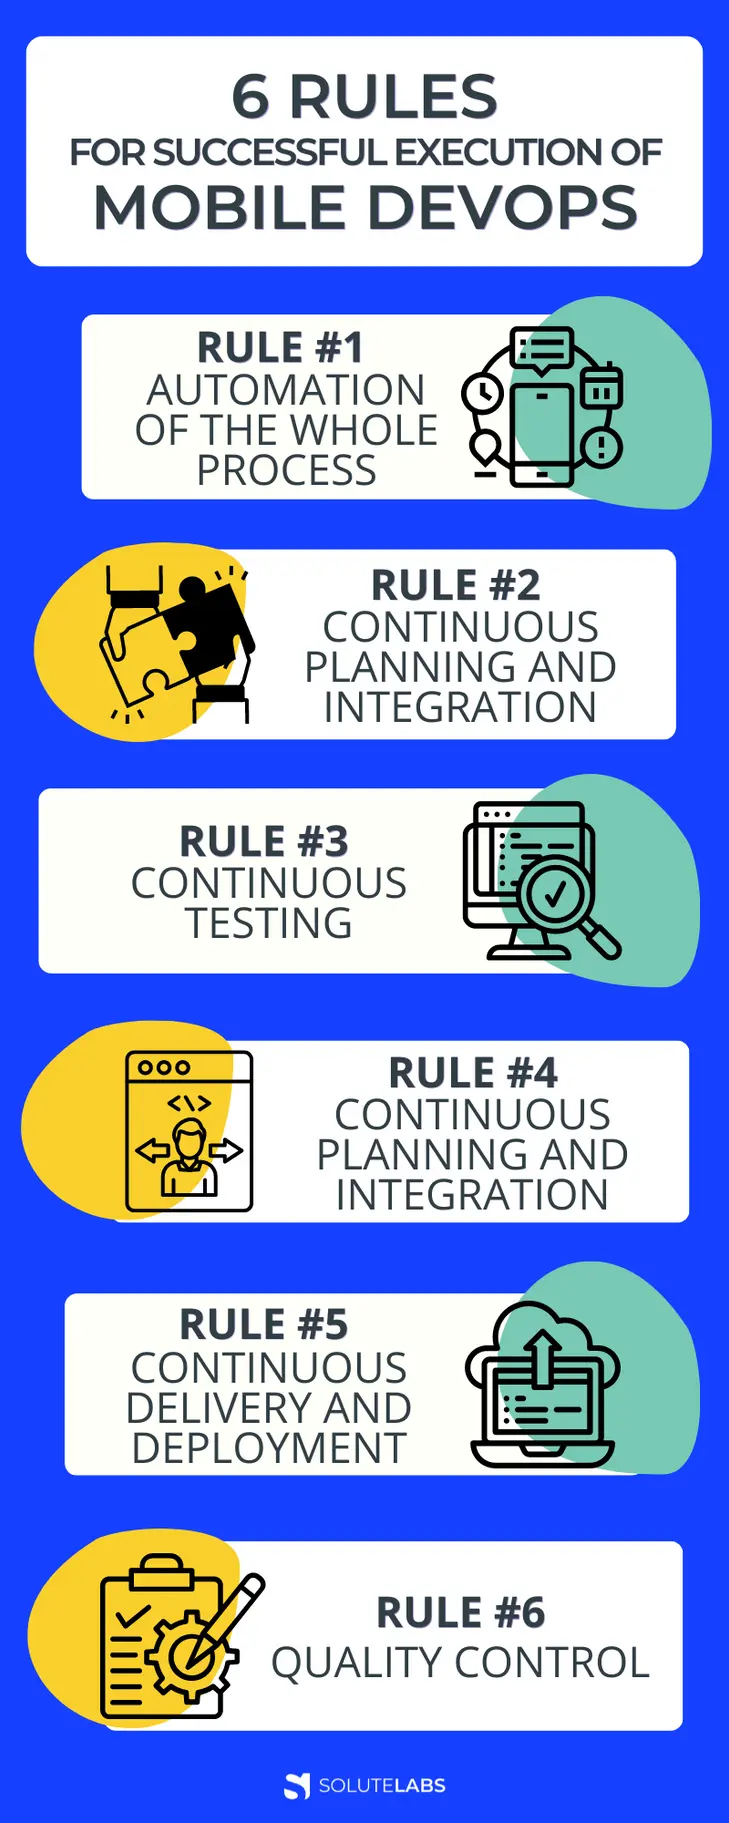 6 Rules for Successful Execution of Mobile DevOps